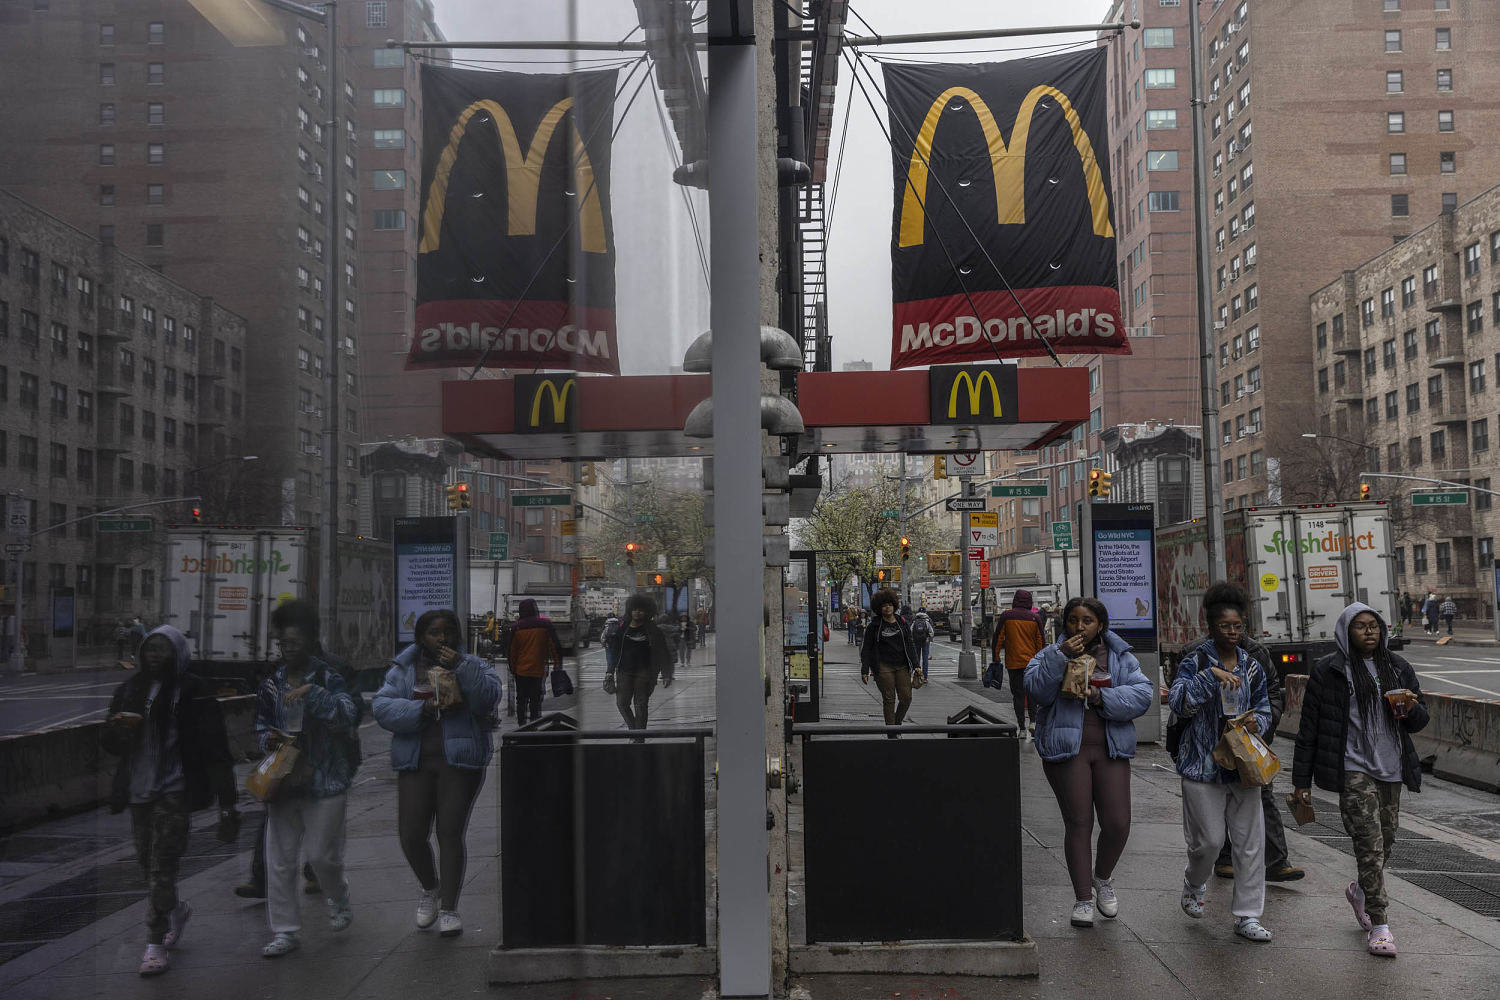 Man with dairy allergy sues McDonald’s, alleging cheese on Big Mac caused anaphylactic reaction